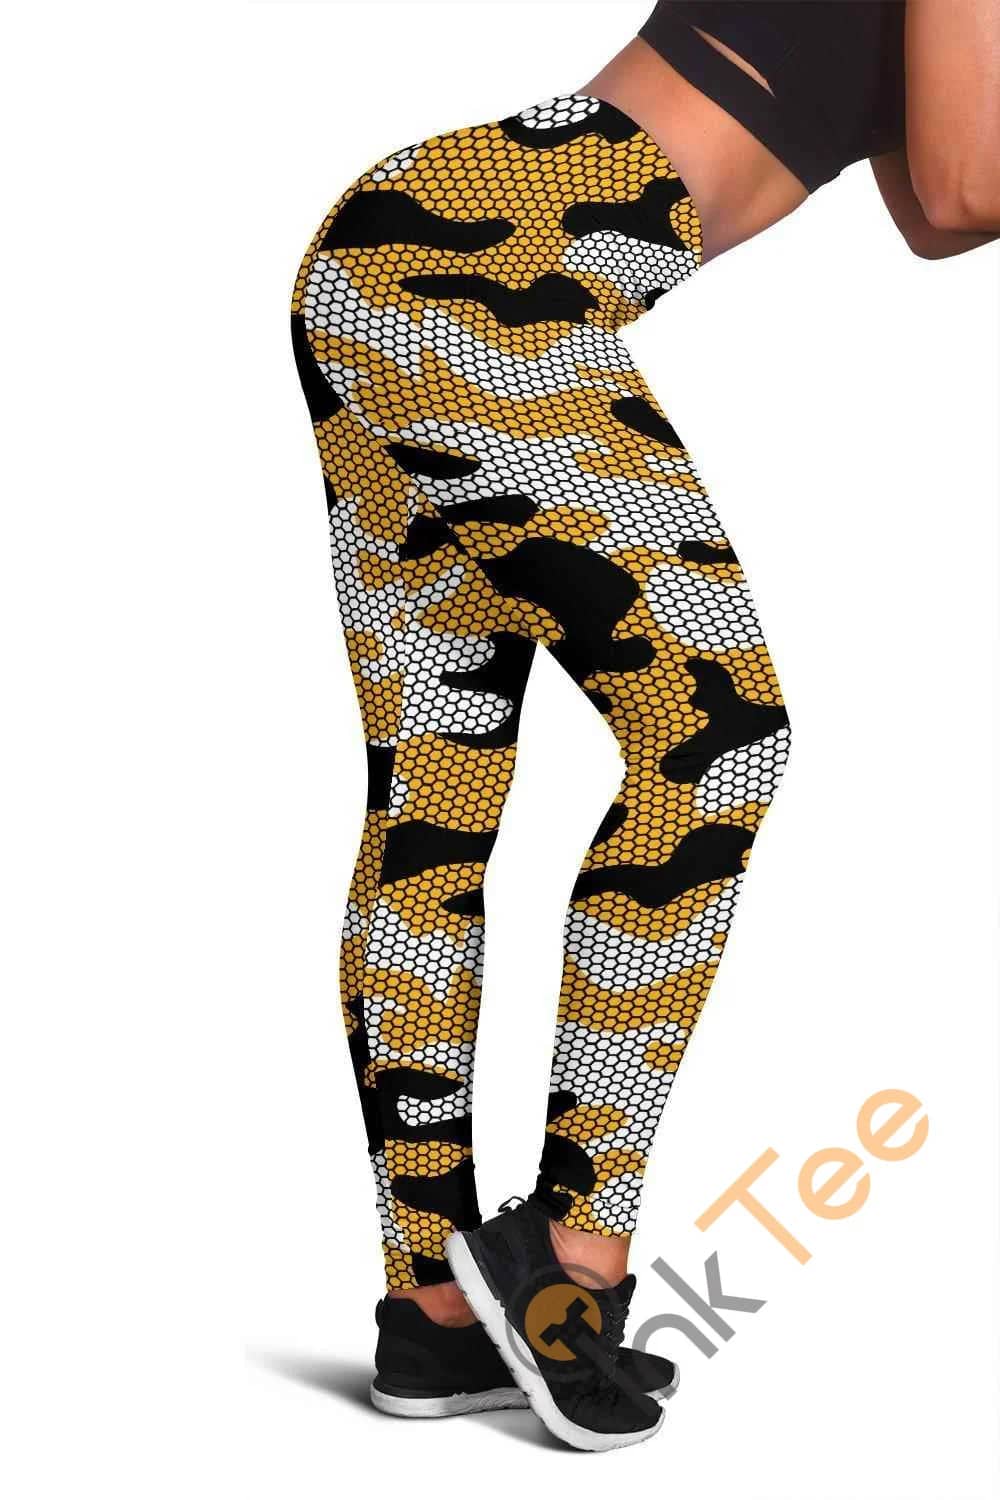 Pittsburgh Steelers Inspired Hex Camo 3D All Over Print For Yoga Fitness Fashion Women's Leggings